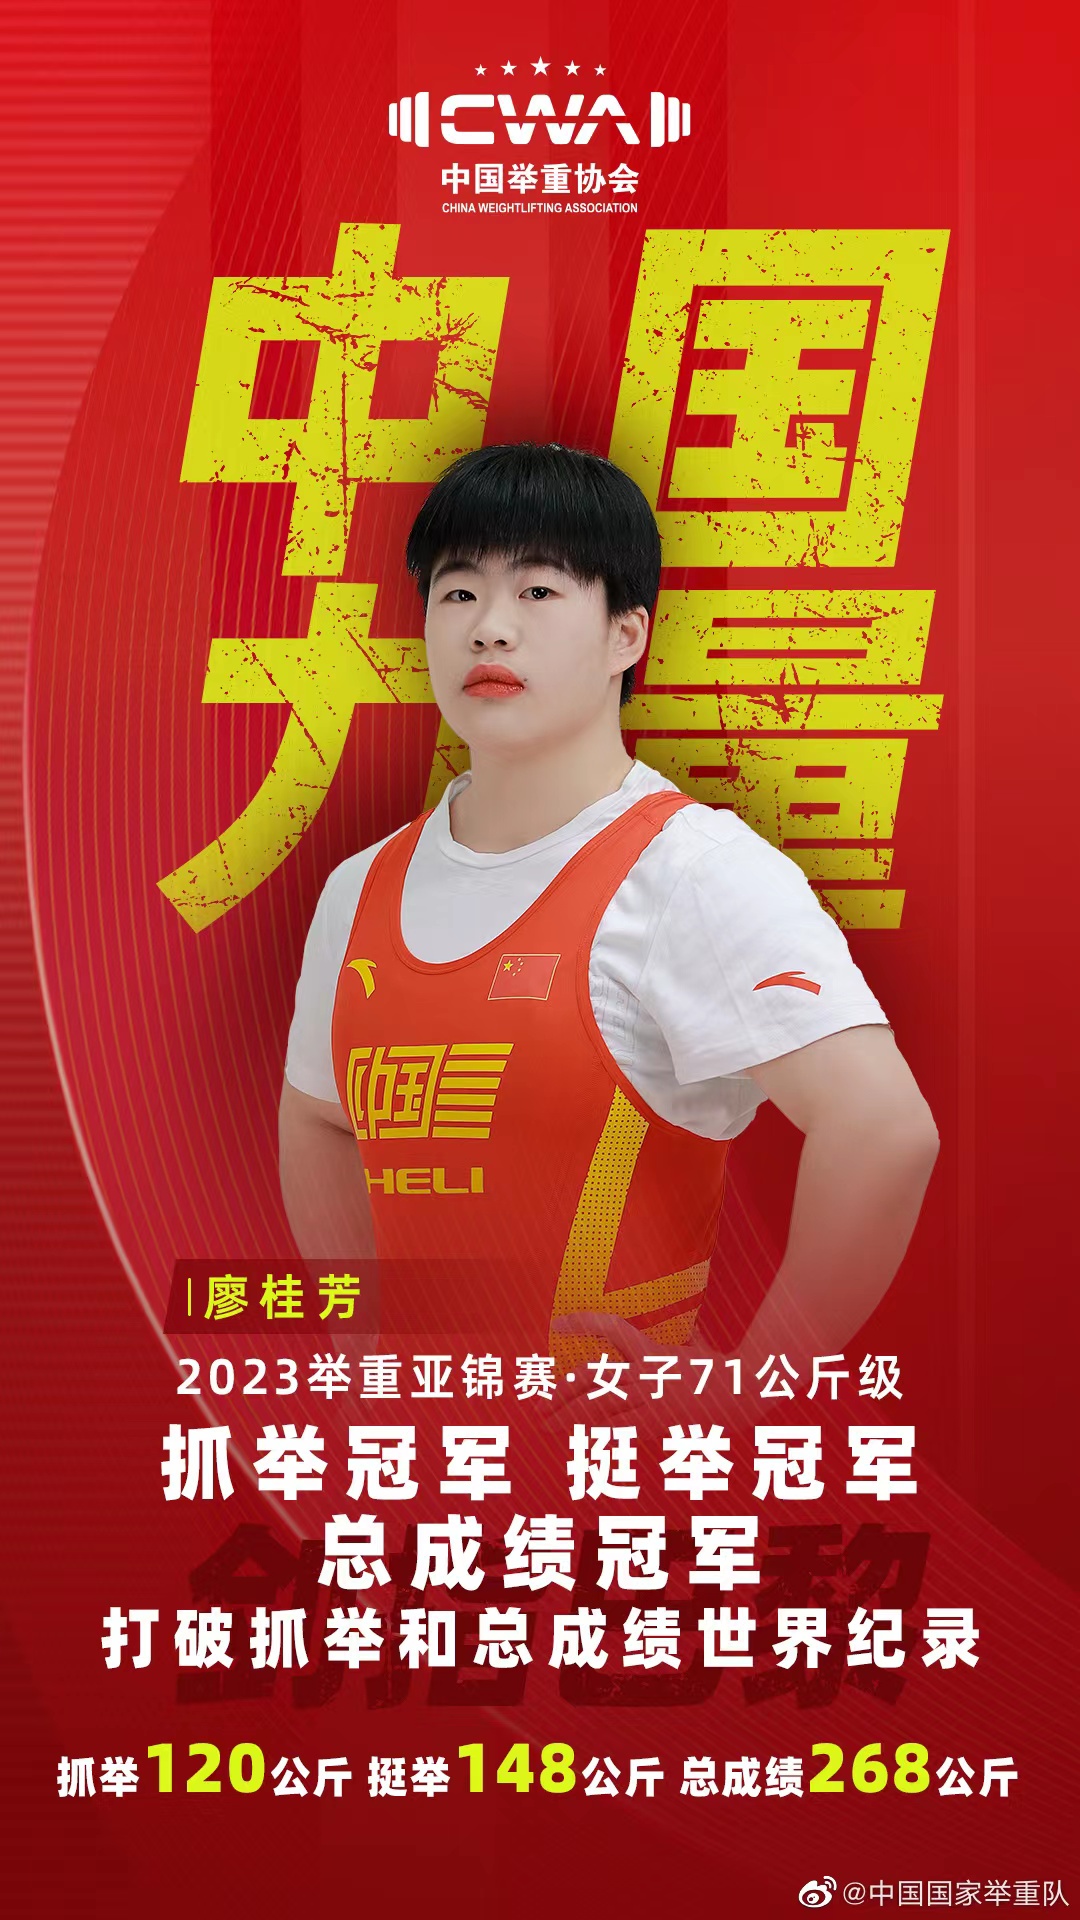 Chinese national weightlifting team's Weibo poster on May 10 honors Liao Guifang's three gold medals at the Asian Weightlifting Championships. /Chinese national weightlifting team